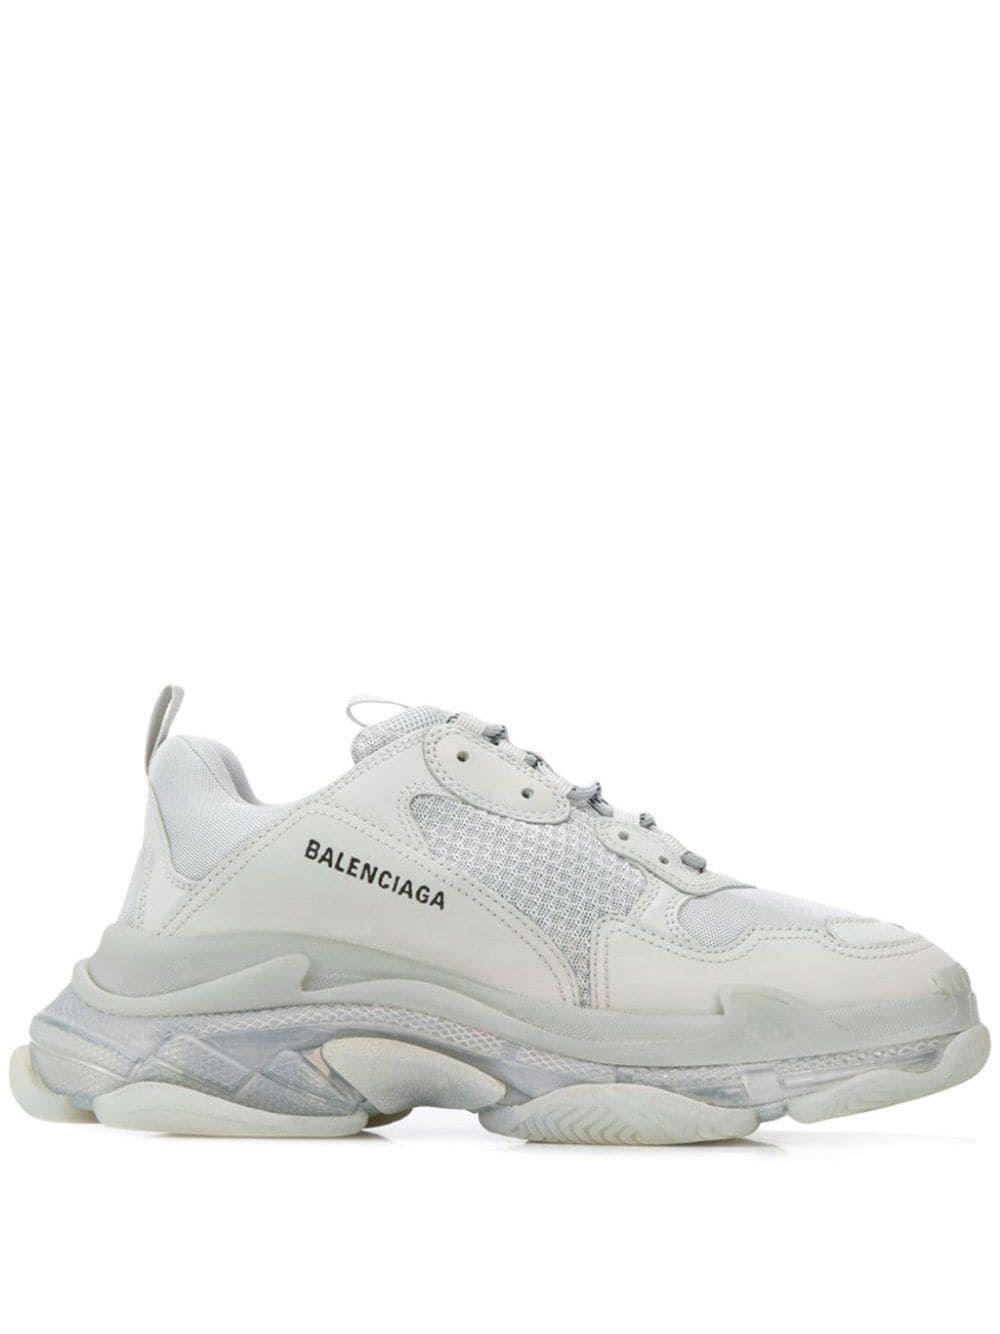 controller Duplikere porcelæn Balenciaga Synthetic Triple S Clear Sole Sneaker in White for Men - Save  39% - Lyst